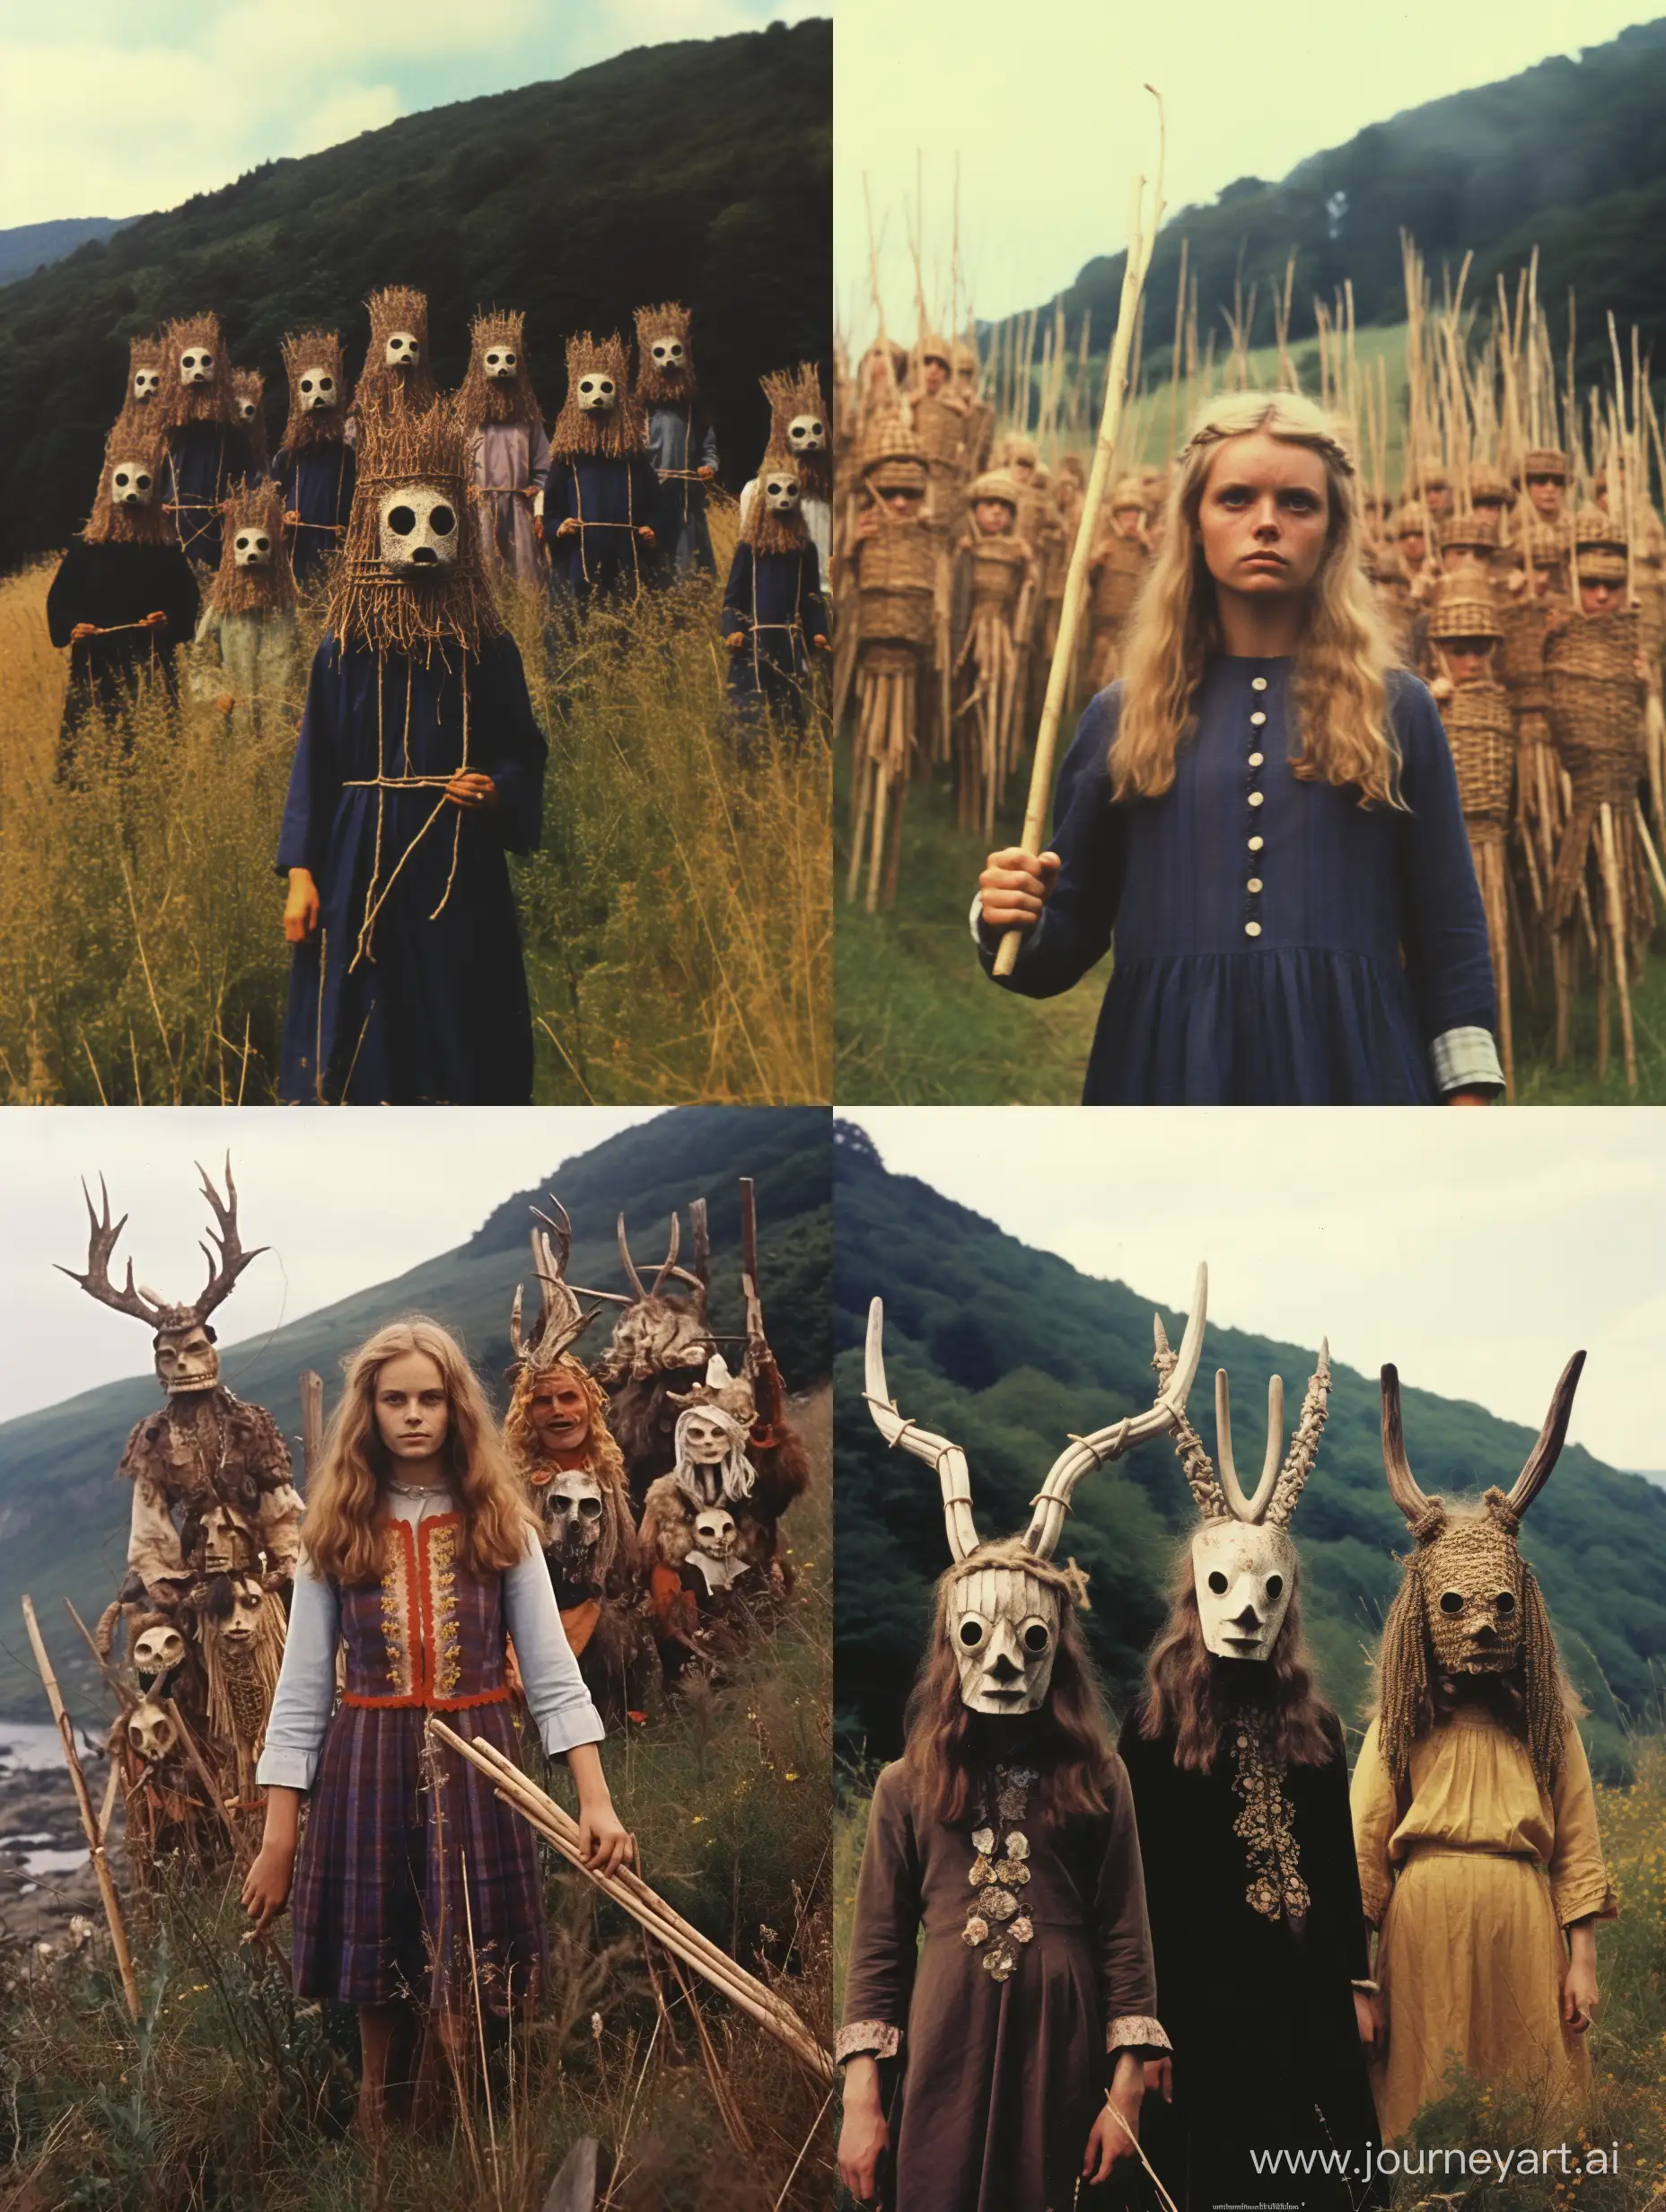 Very unsettling photo from the style of the 1970s that evokes folk horror, the ritual, unhinged, wicker man, pagan horror, midsommar, Sophie Gengembre Anderson, kitty lange kielland, photo taken with provia, grainy, British rural, 1960s, hikecore